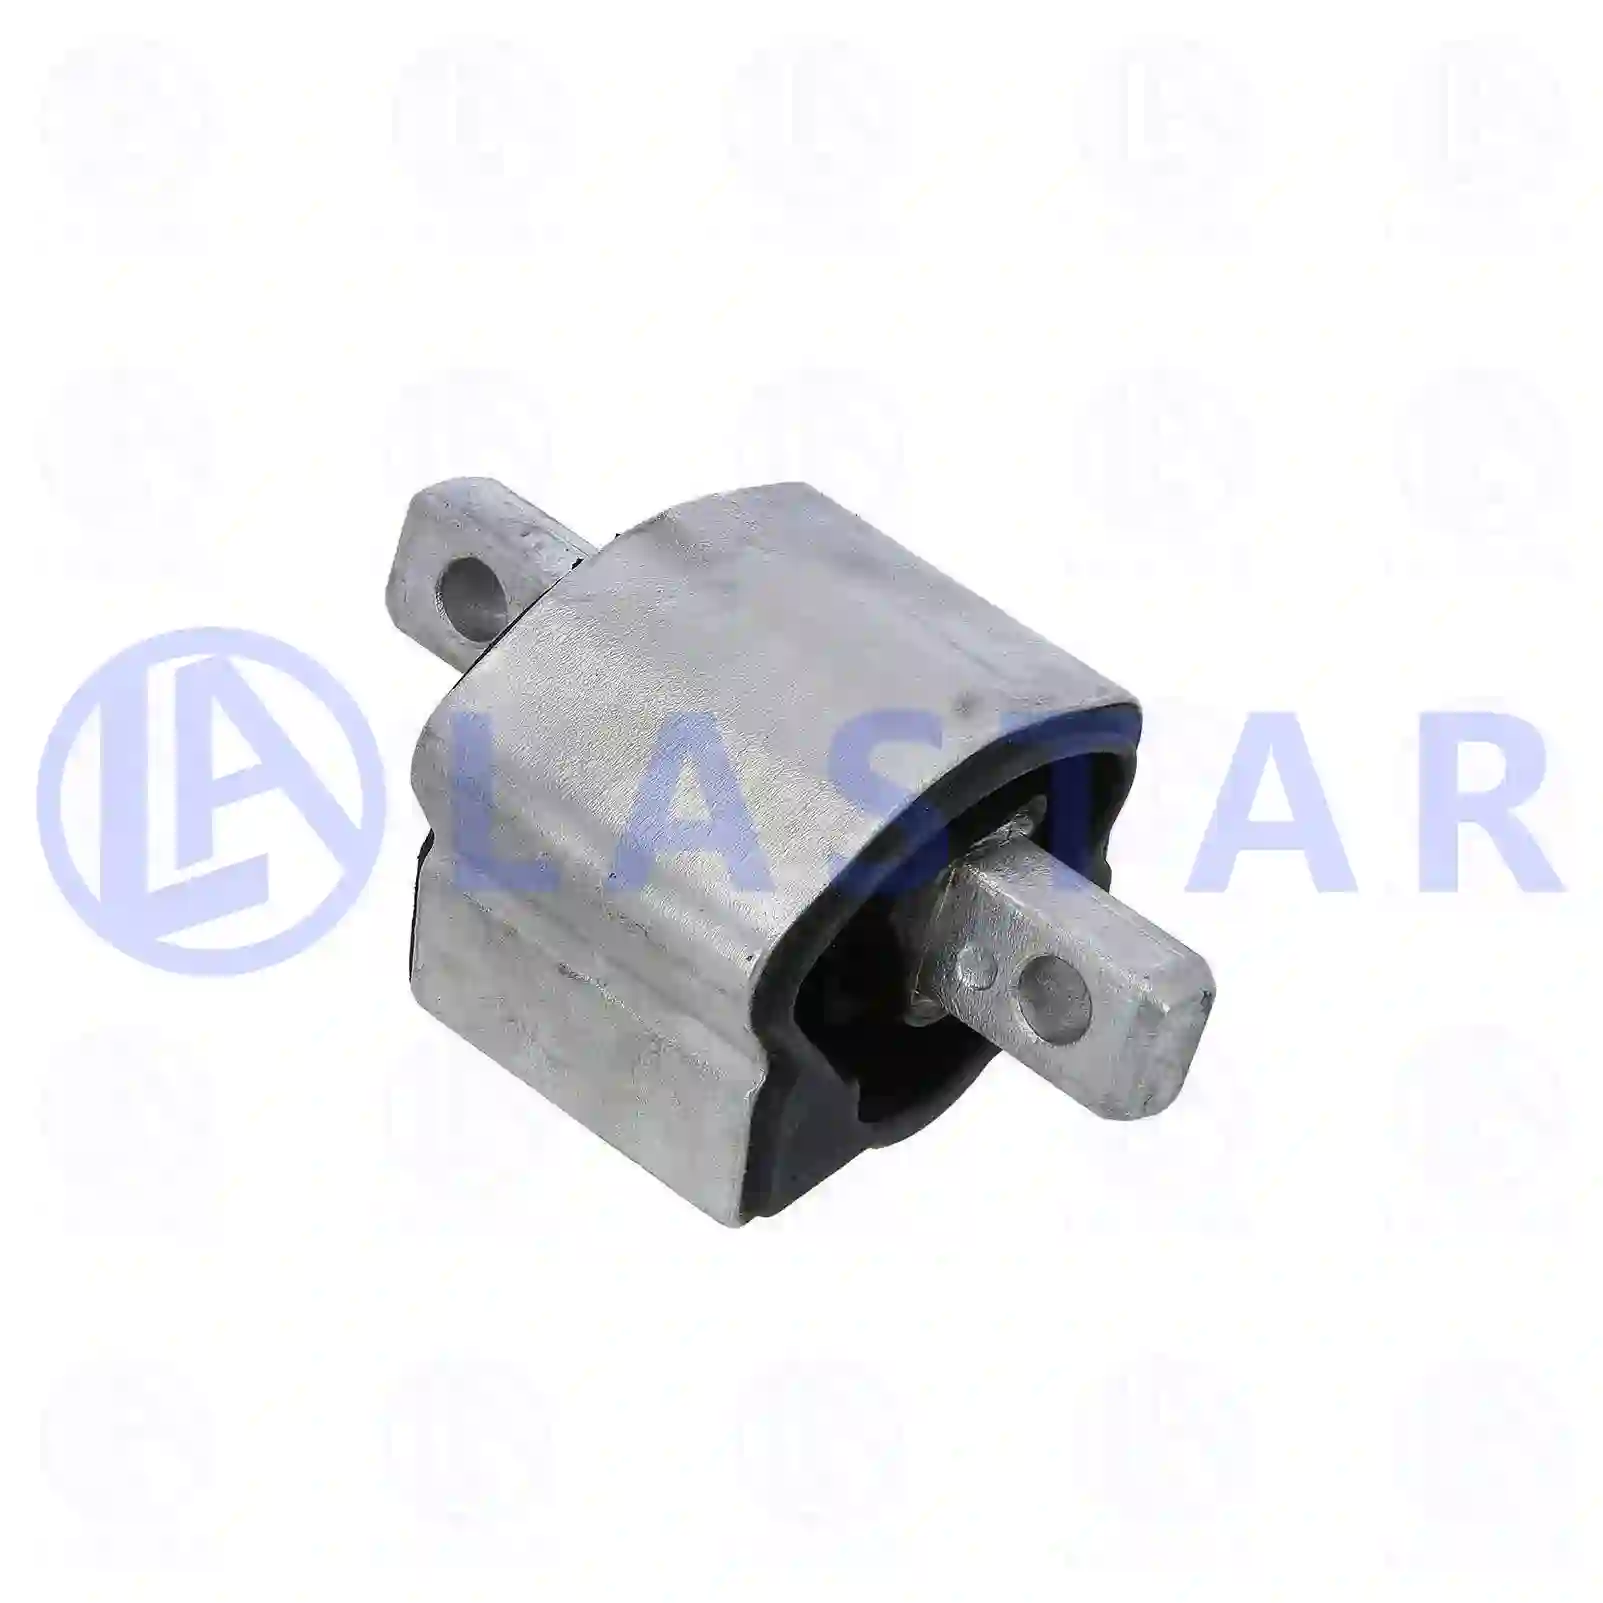 Engine Suspension Mountings Engine mounting, rear, la no: 77700340 ,  oem no:1402401118, 1402401218, 1402401318, 1402401718, 1402401818, 1702400018, 2122400318, 2122400418, 2122400618, 2122400818, 2122401018, 2122401618, 2122401718, 2122401818, 2202400118, 2202400218, 2202400418, 2202400518, 2202400718, 2202401818 Lastar Spare Part | Truck Spare Parts, Auotomotive Spare Parts